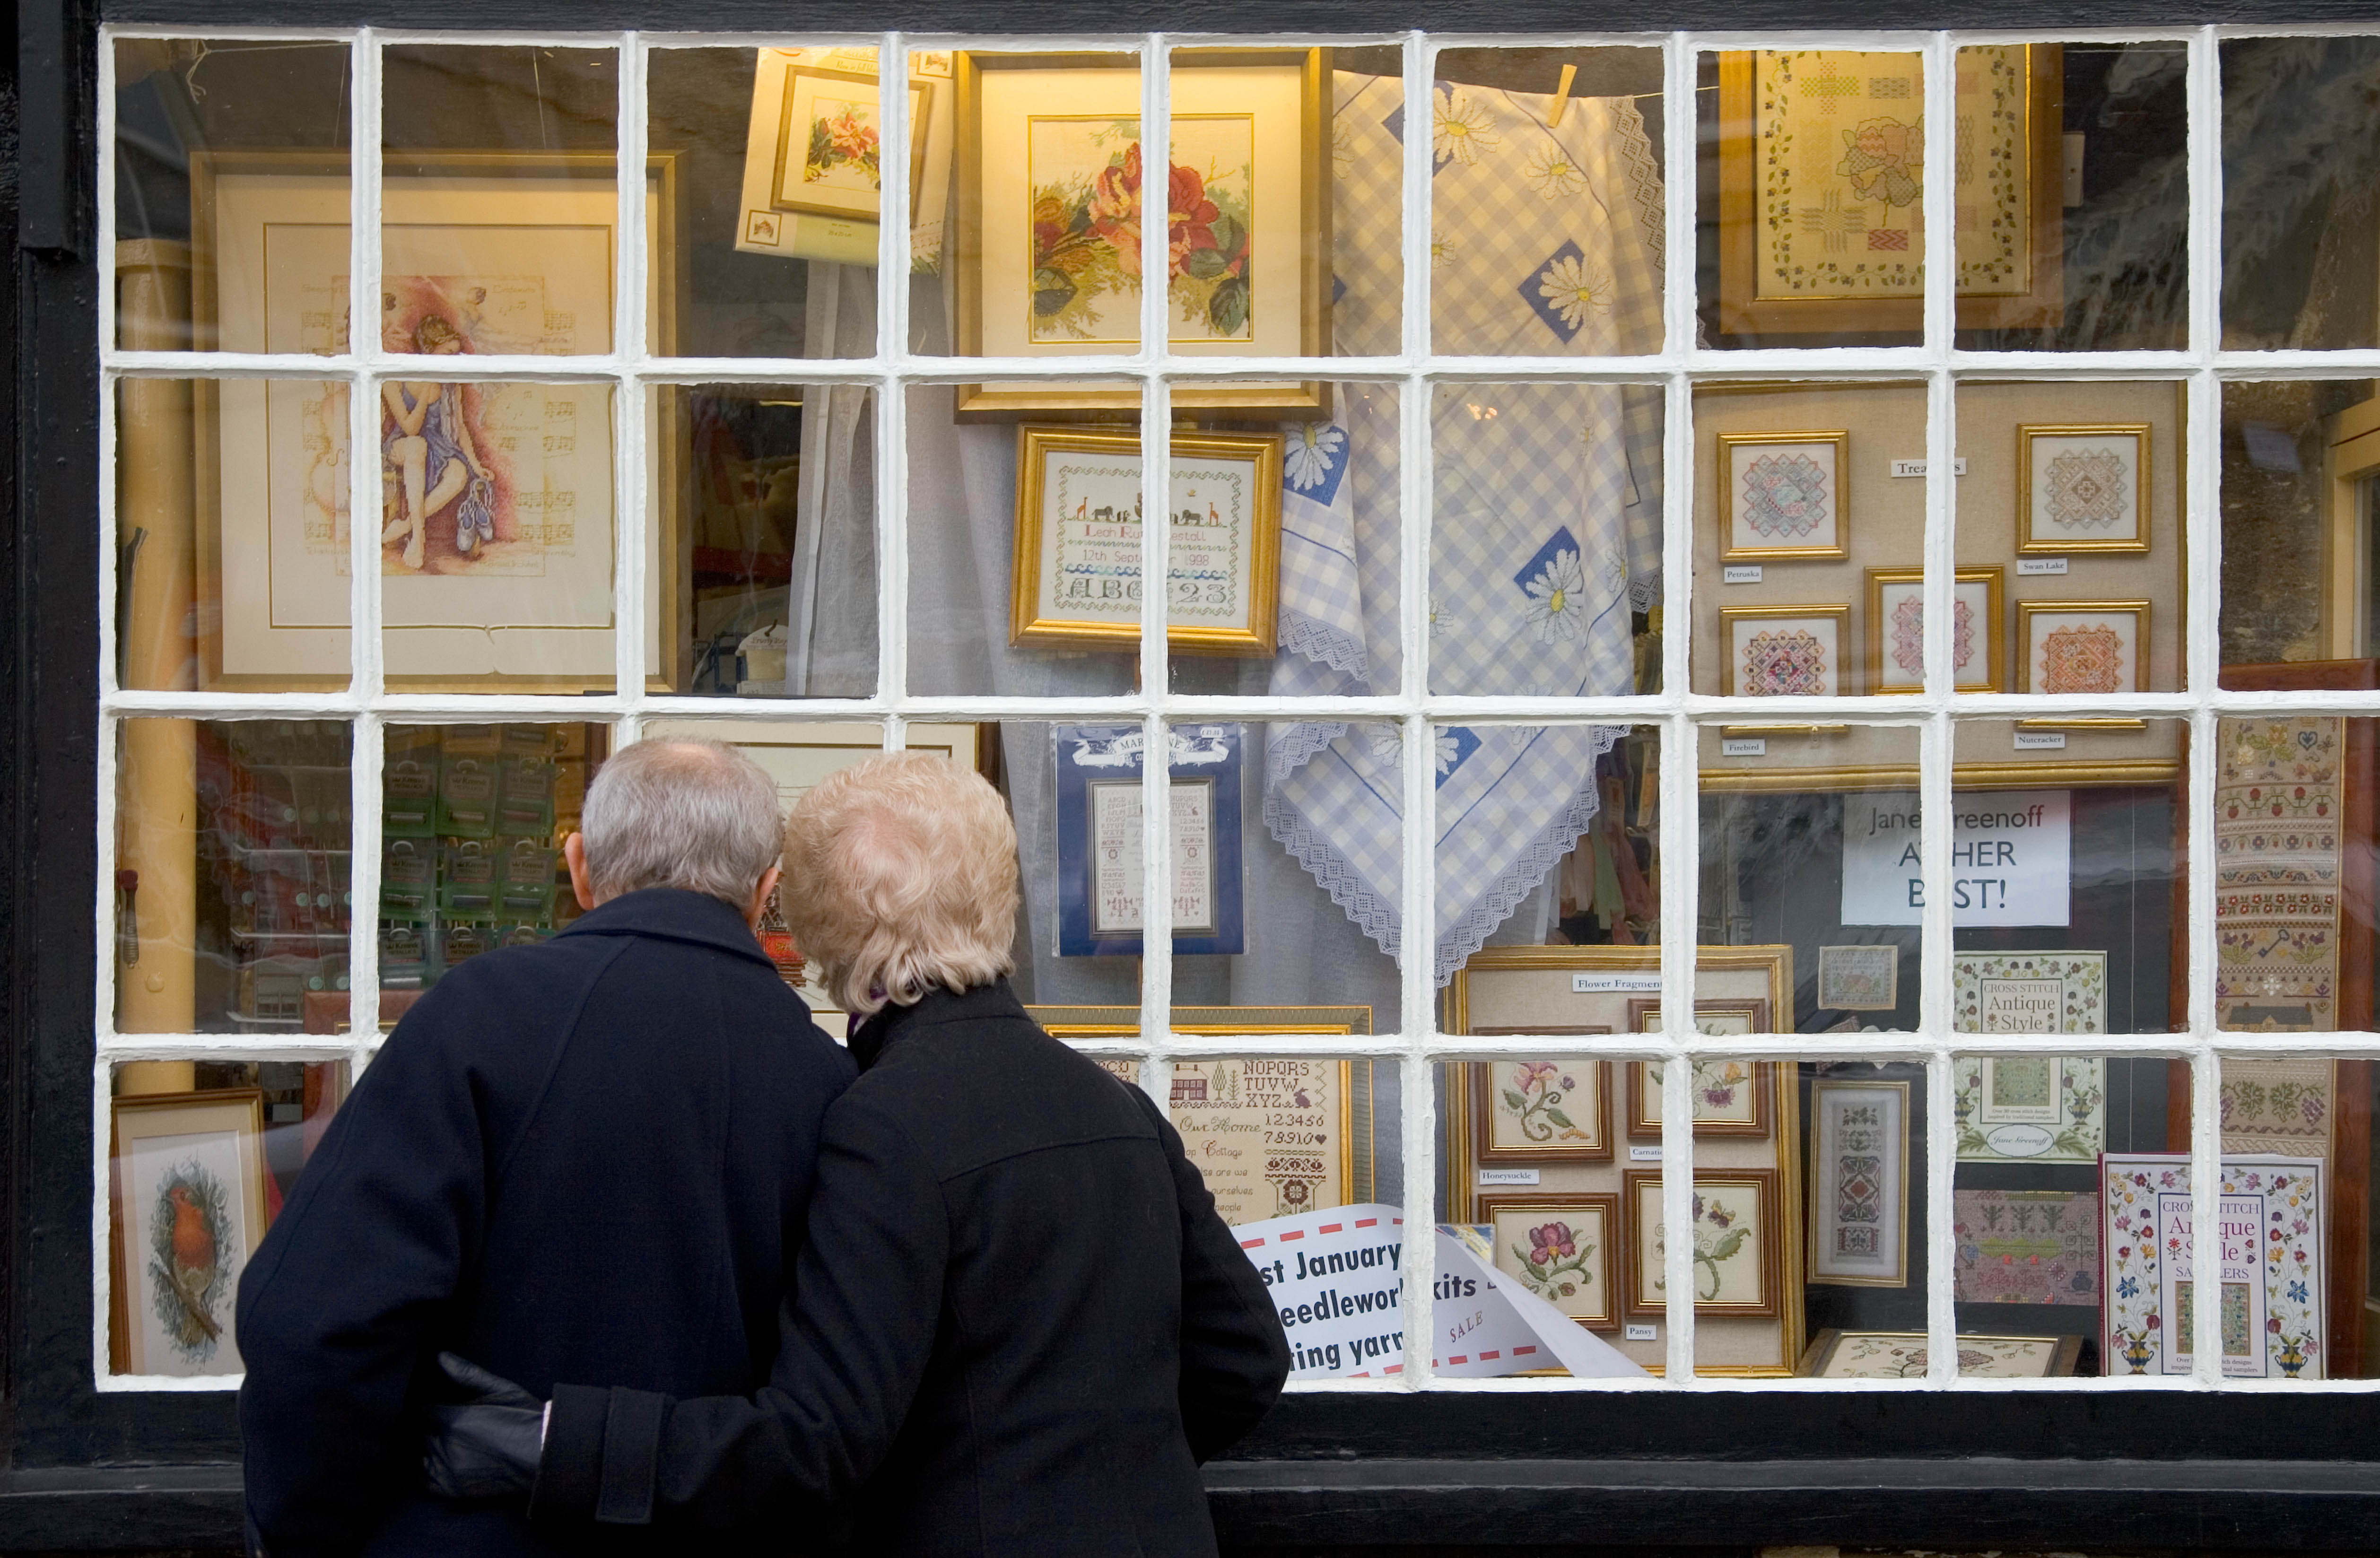 Elderly couple look in the window of a haberdashery shop, Burford, Oxfordshire, UK | Photo : Getty Images